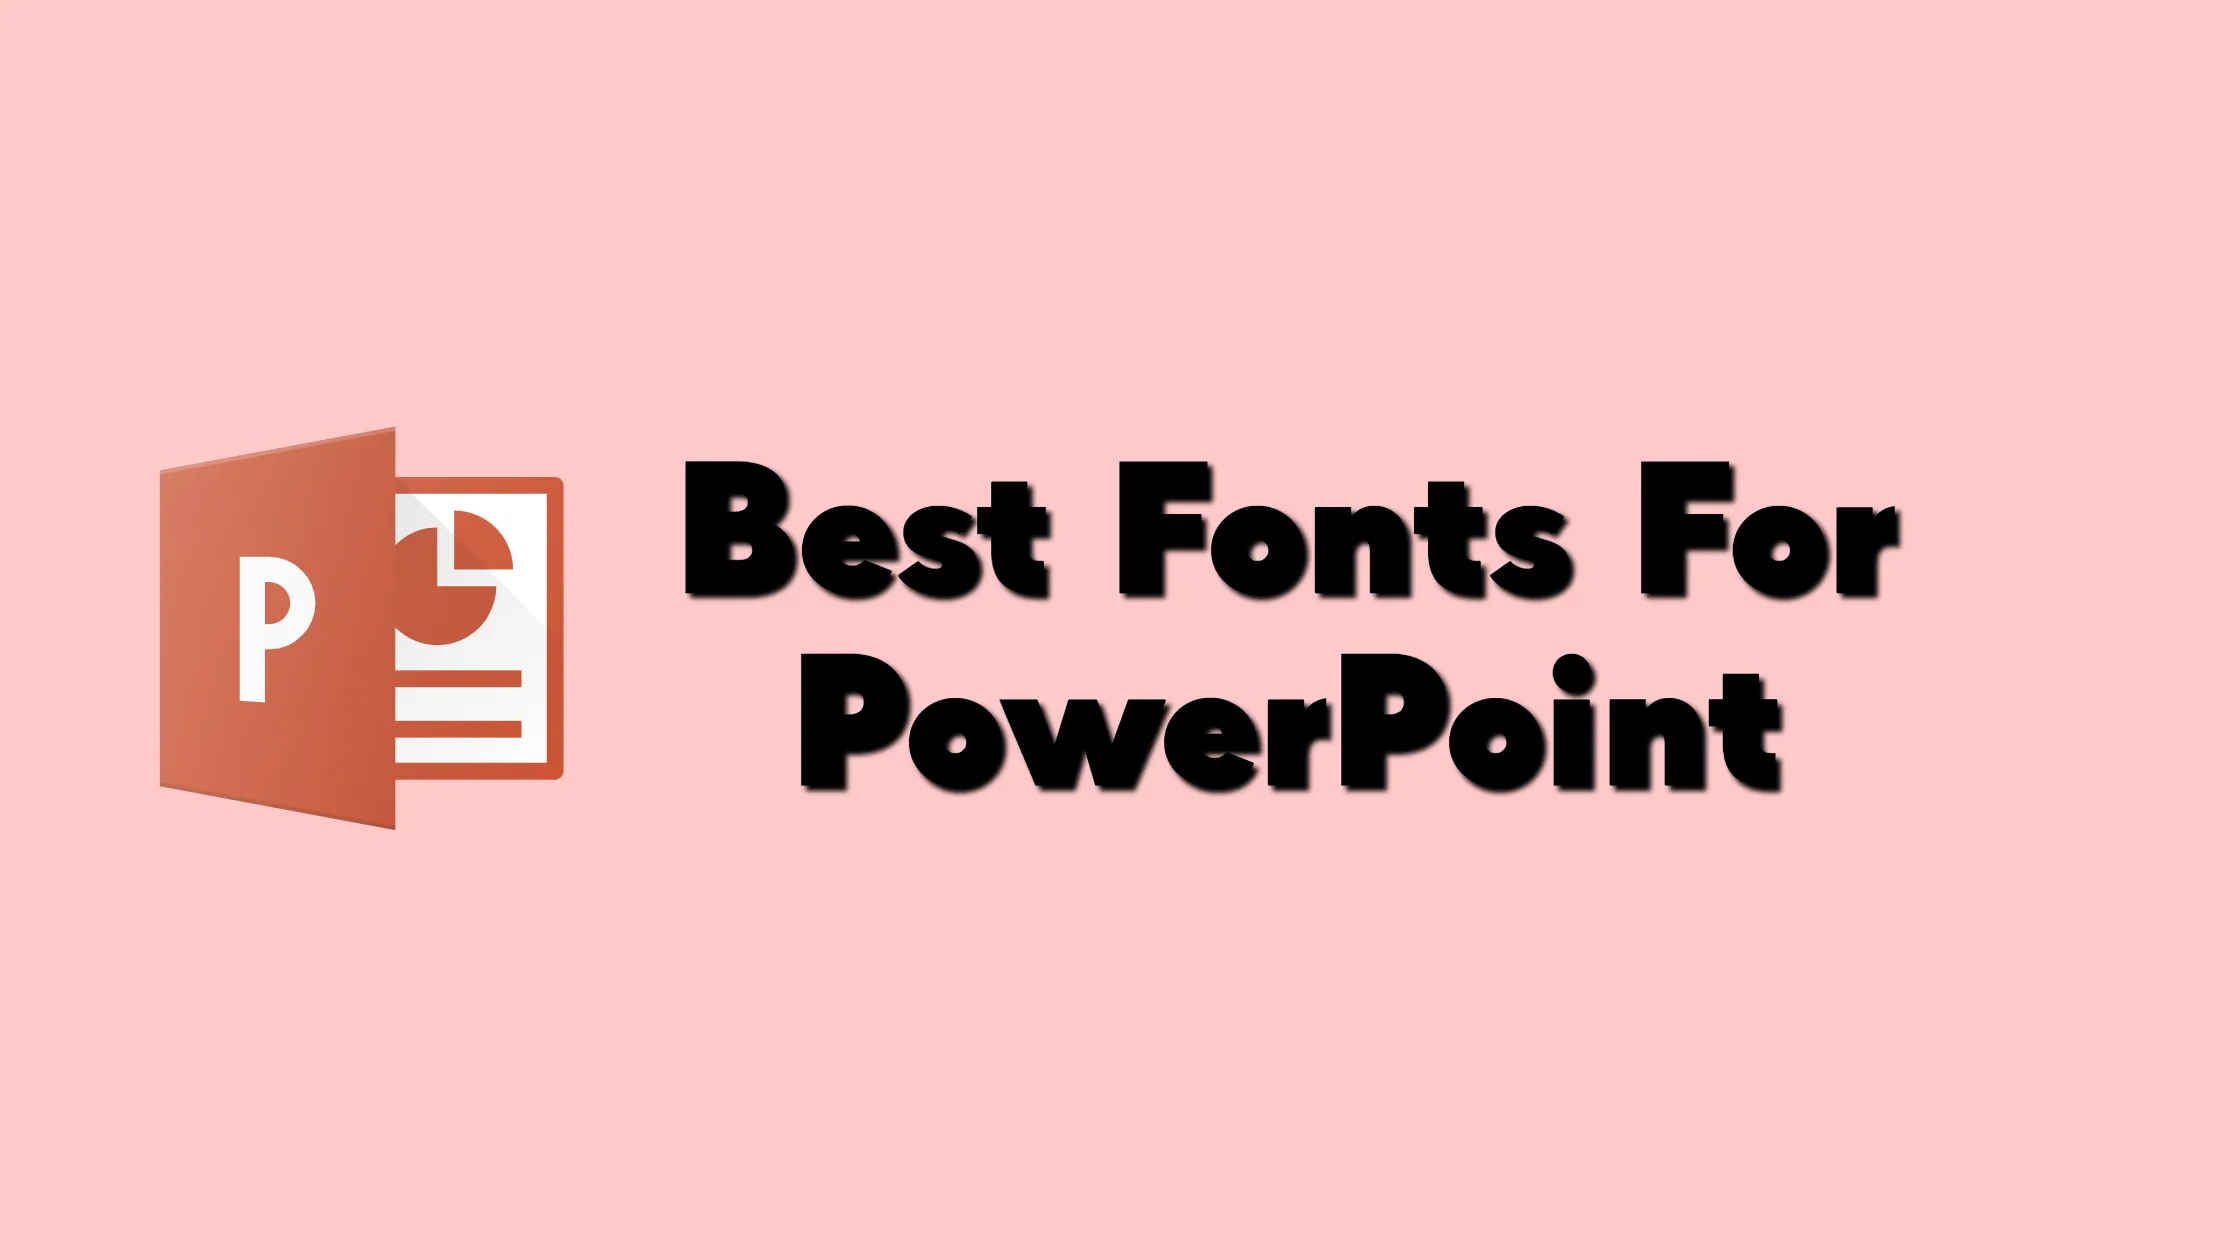 “The Secret To Professional Looking Slides: Best Fonts For PowerPoint”